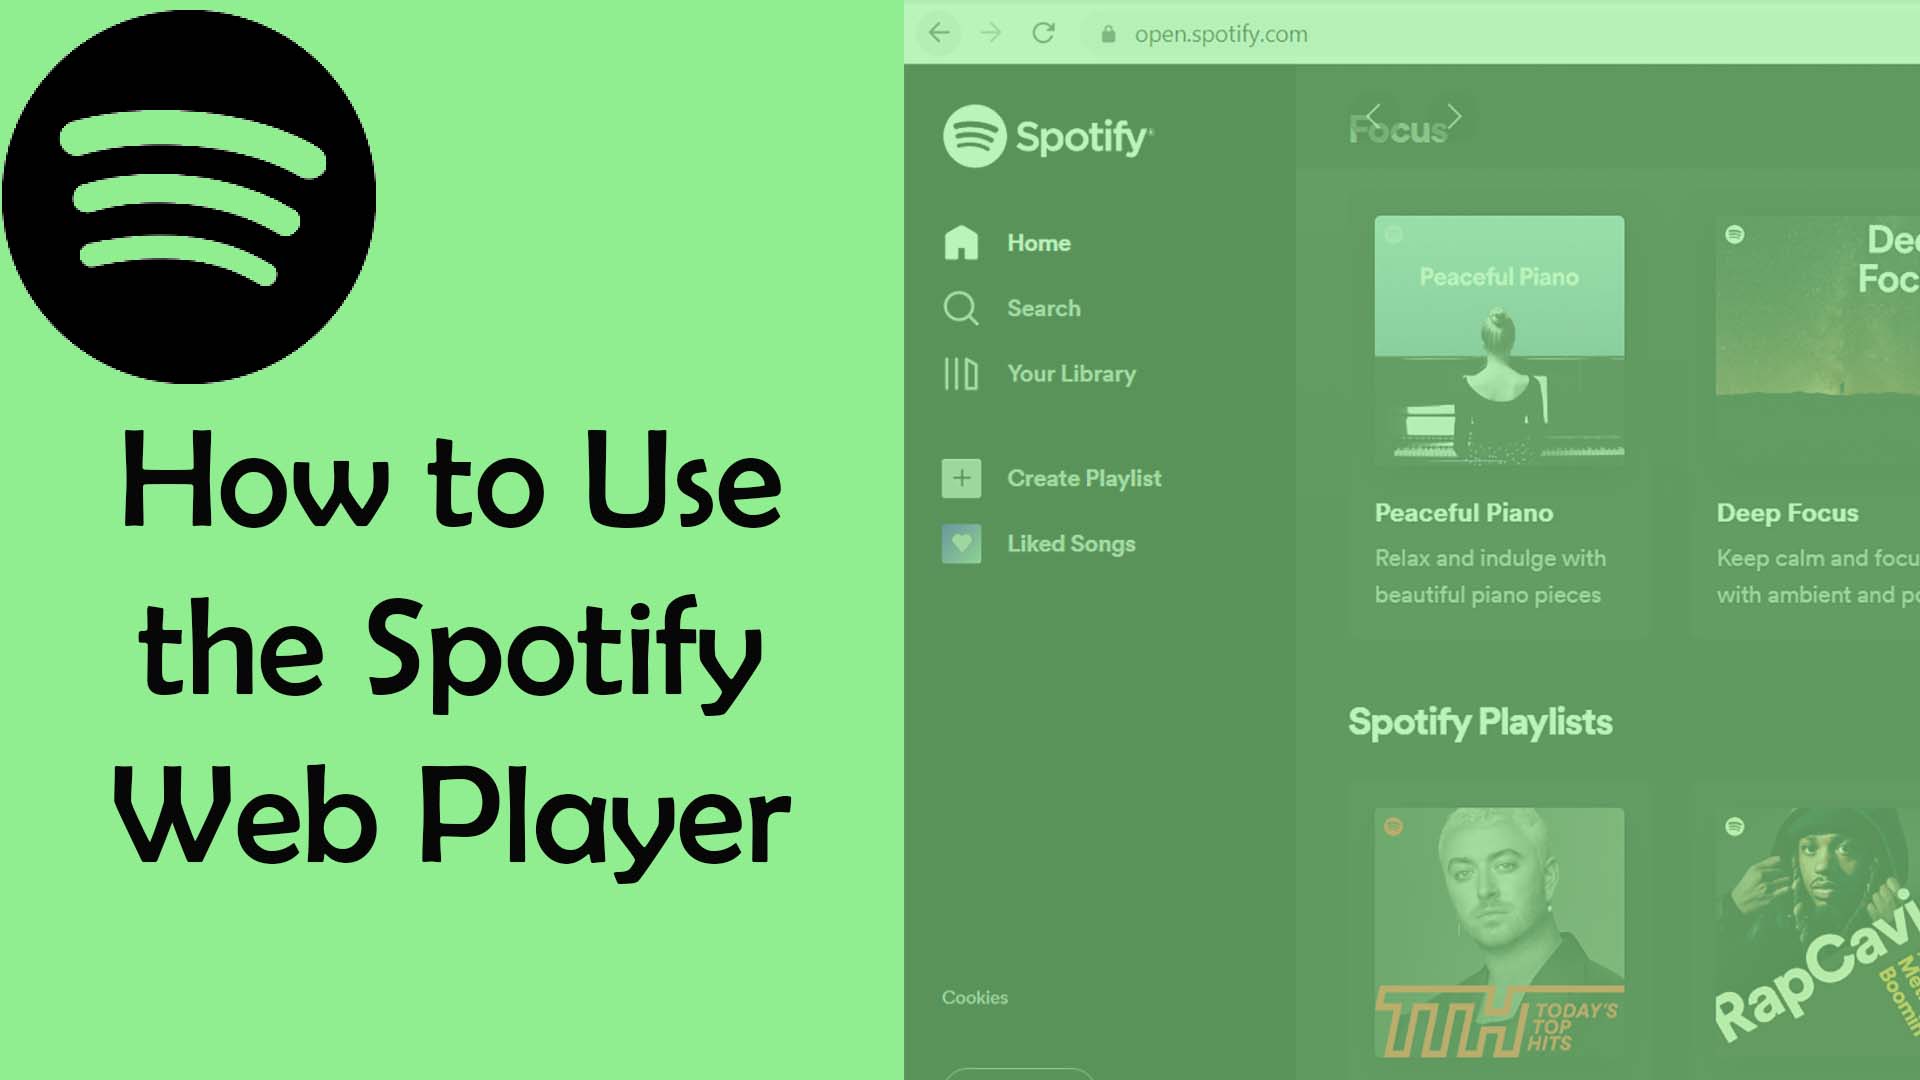 How to use the Spotify Web Player